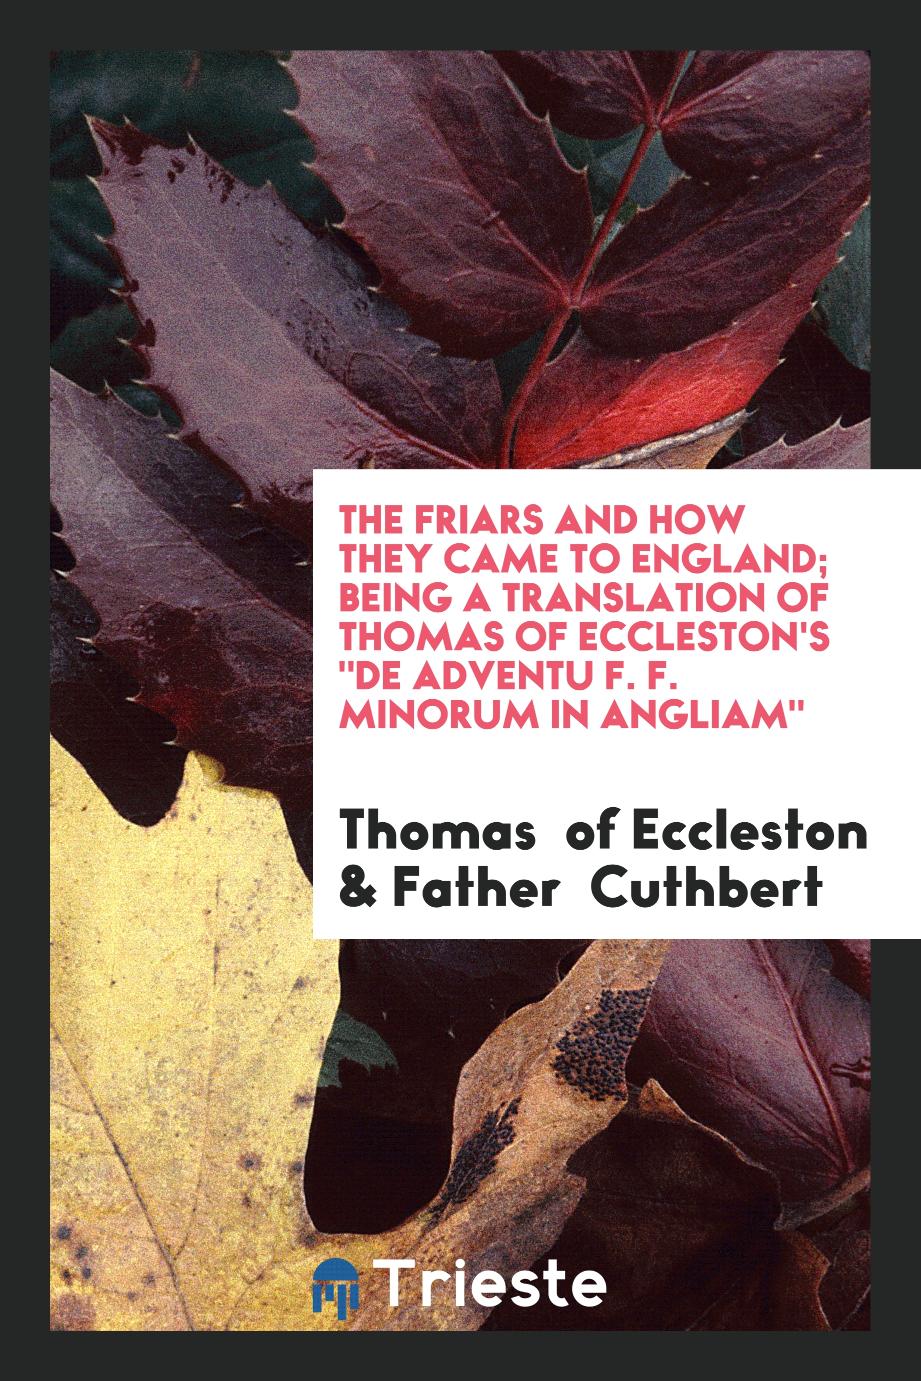 The Friars and How They Came to England; Being a Translation of Thomas of Eccleston's "De Adventu F. F. Minorum in Angliam"